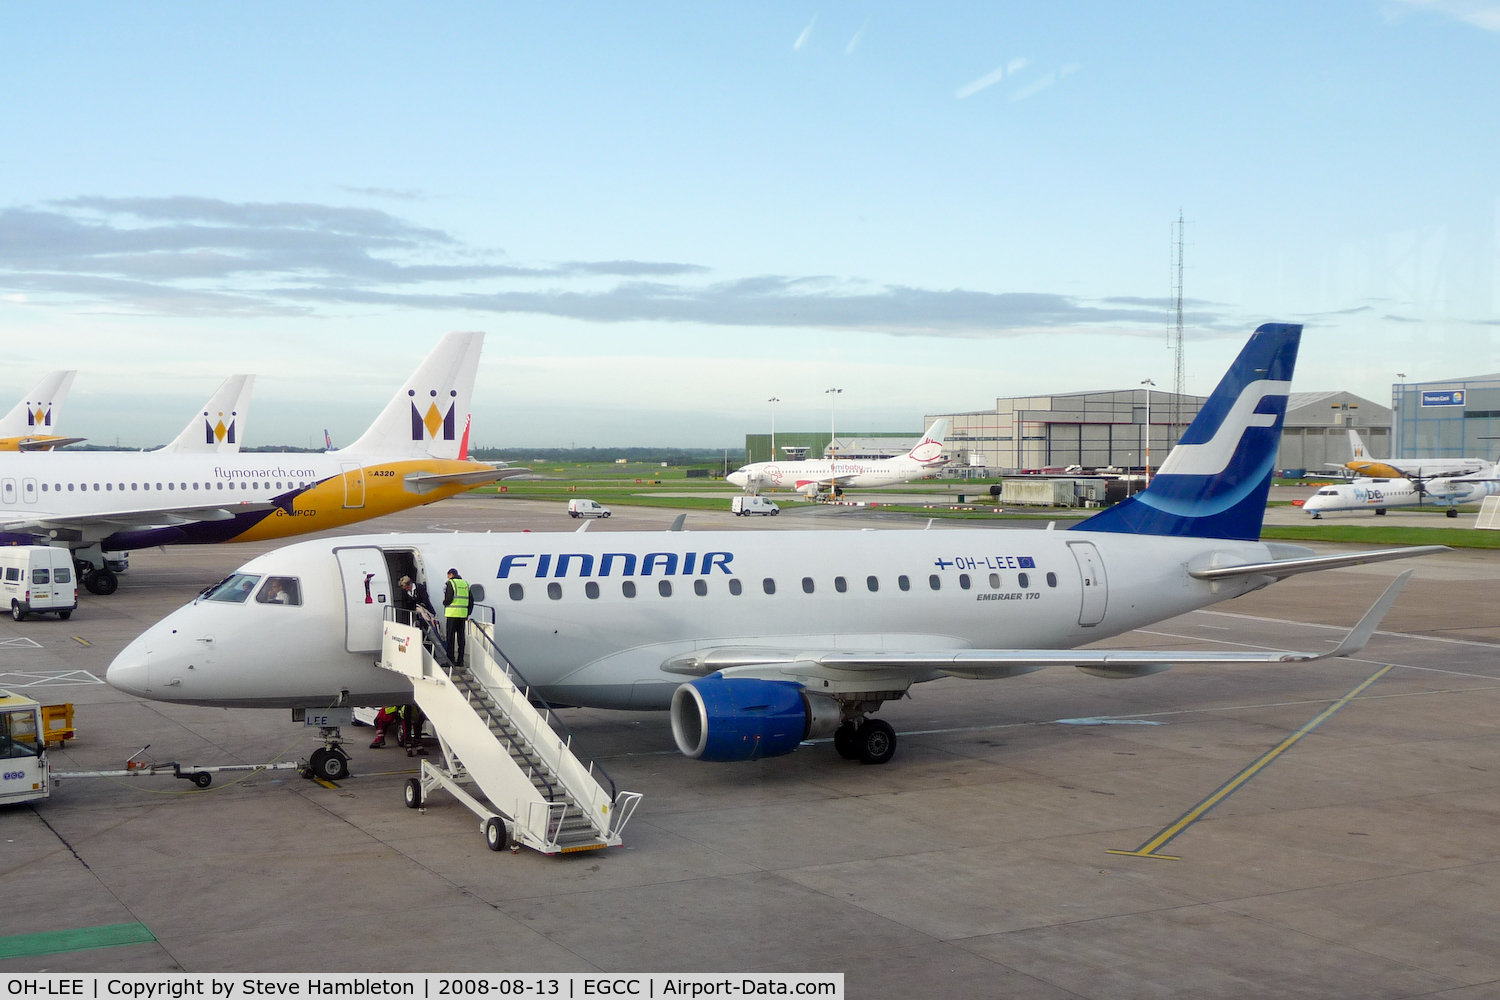 OH-LEE, 2005 Embraer 170LR (ERJ-170-100LR) C/N 17000093, Nearly ready for pushback for it's flight to Helsinki